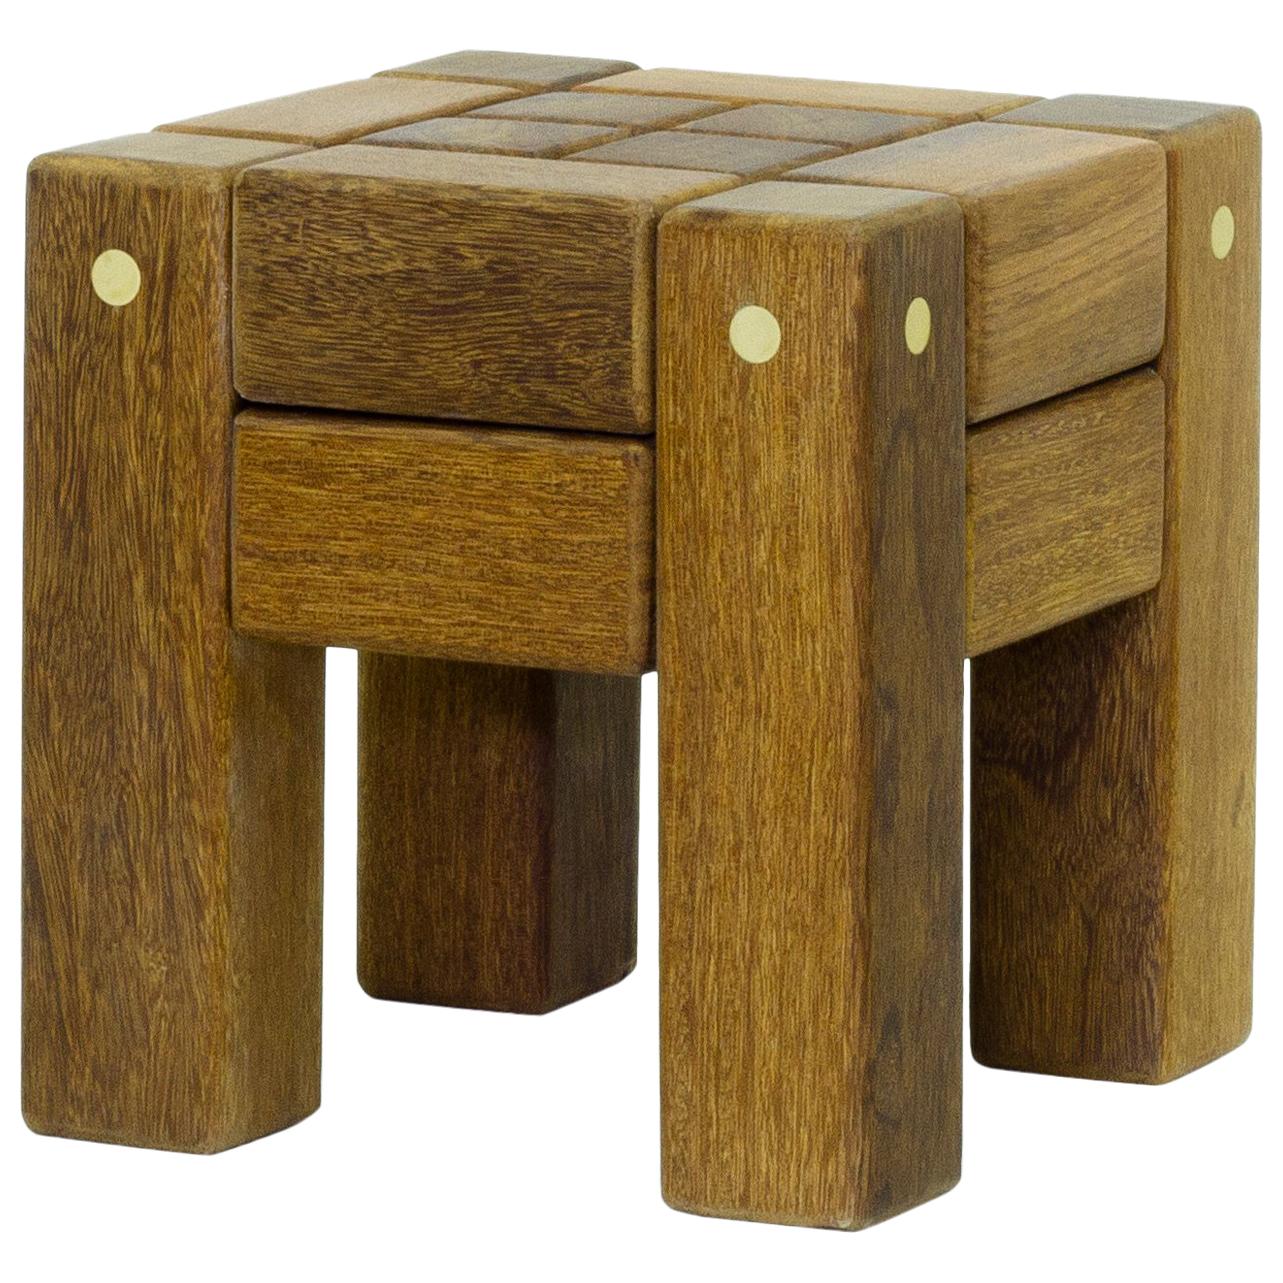 Stool in Hardwood and Brass. Brazilian Contemporary Design by O Formigueiro. For Sale